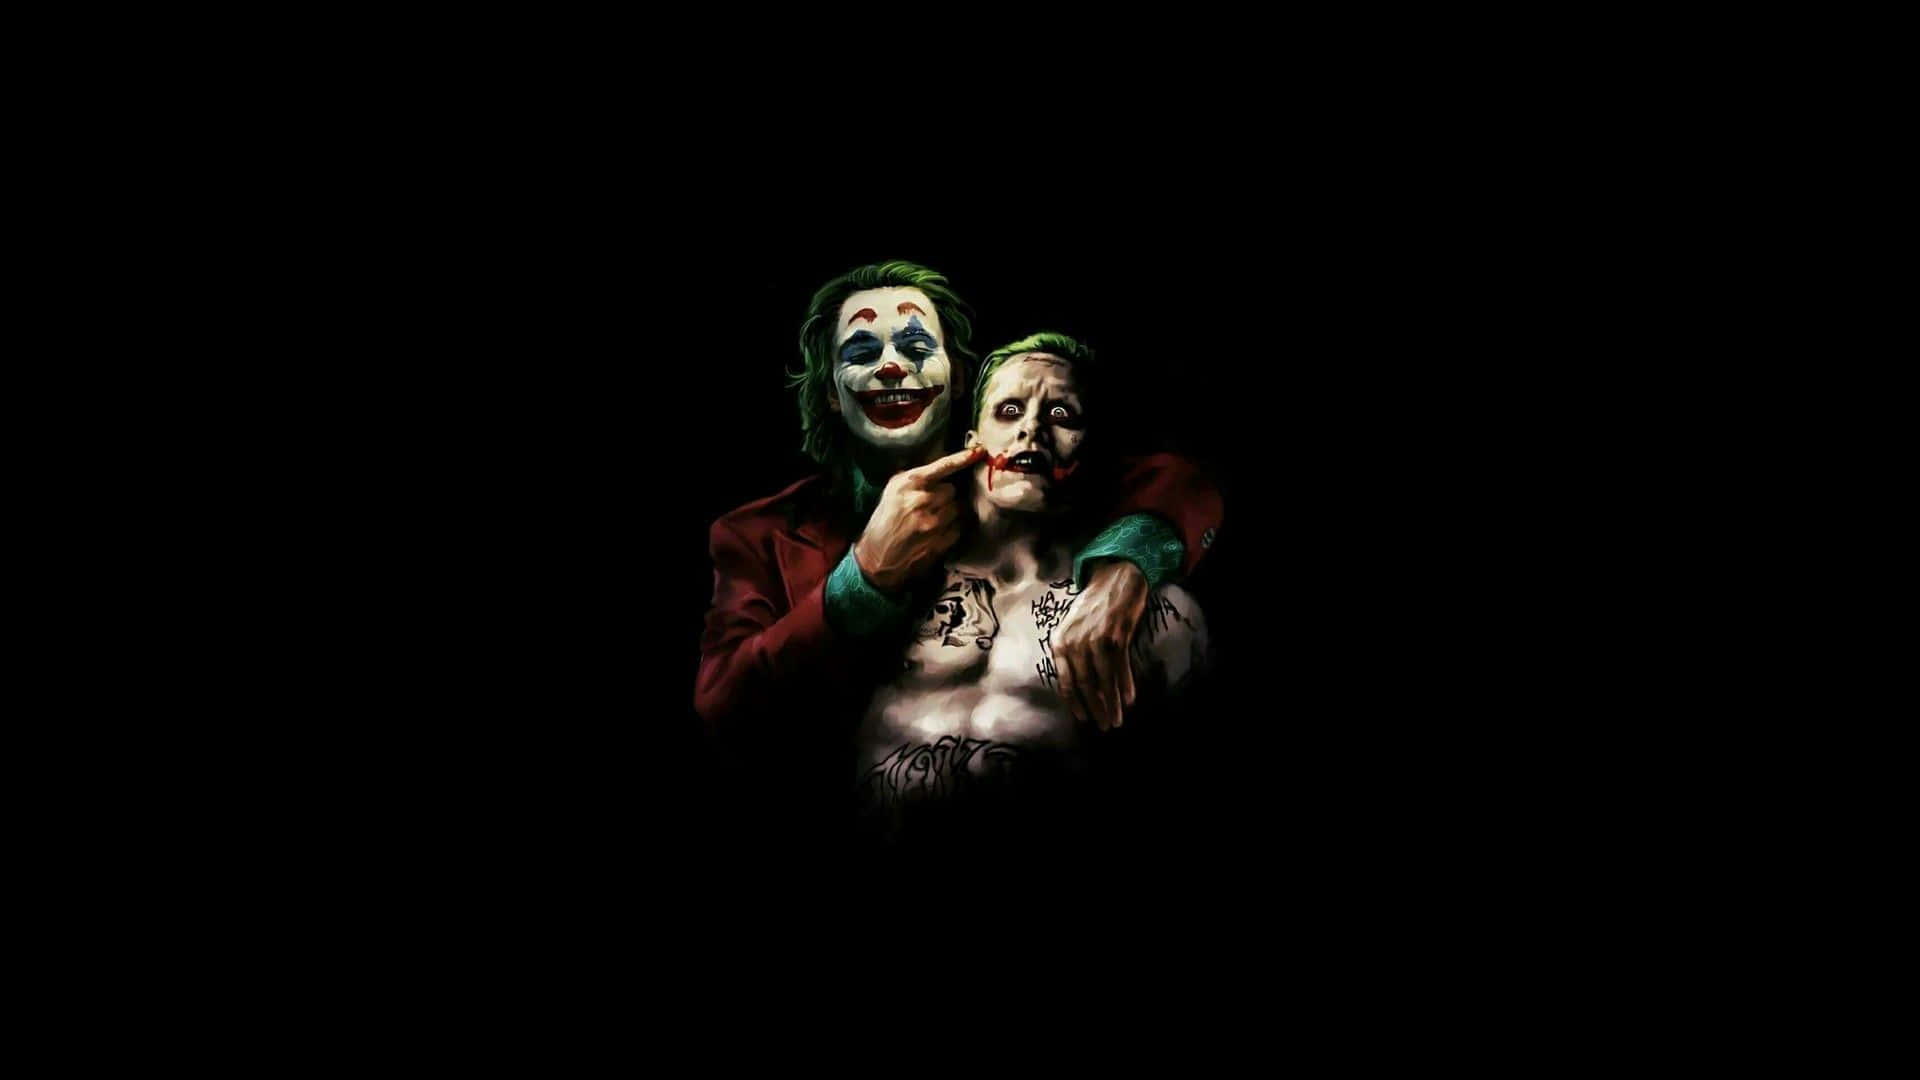 "Put on a happy face, it's time for the Joker!" Wallpaper